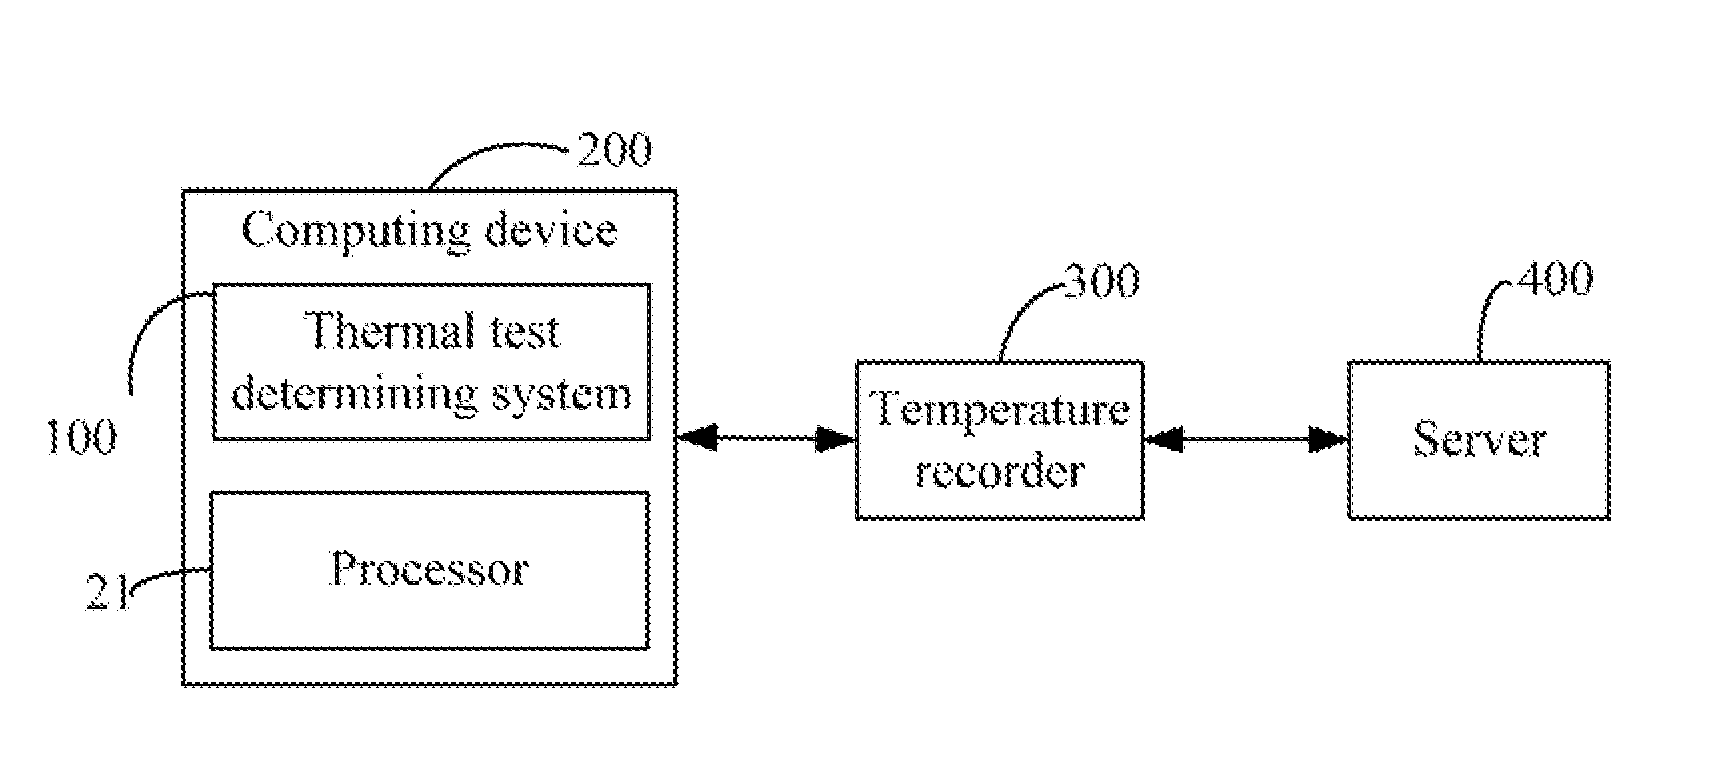 Thermal test determining system and method for server